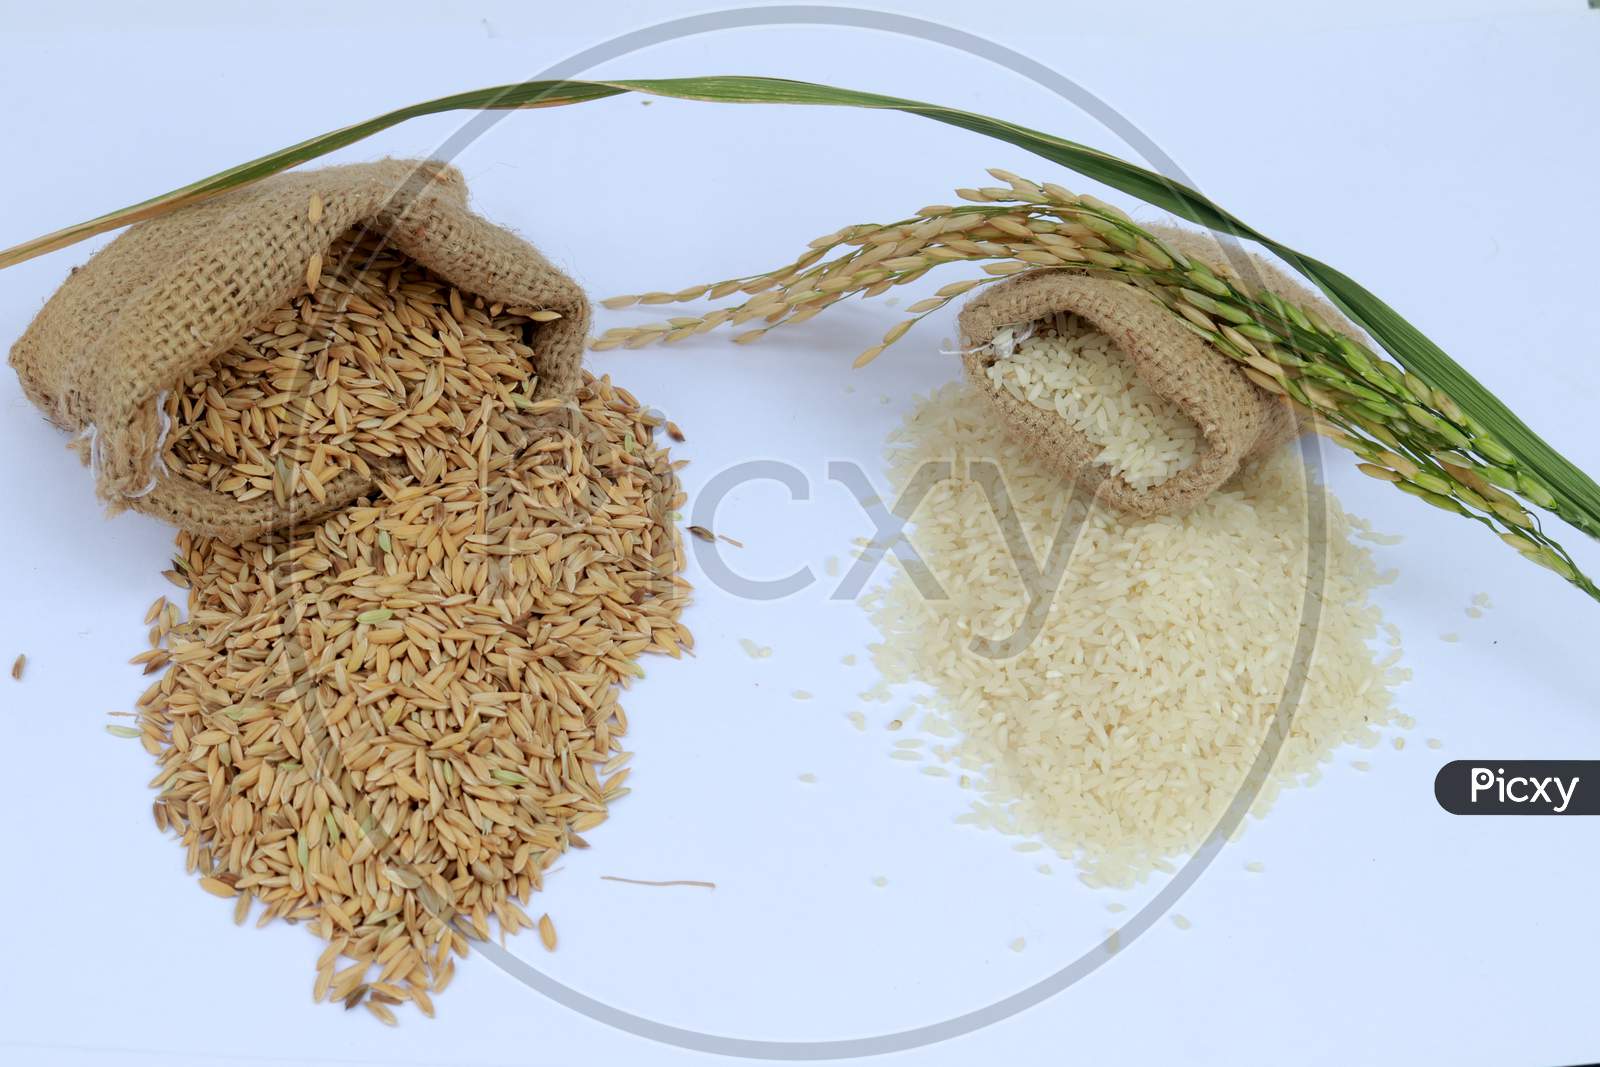 Rice In The Burlap Bag. Healthy Eating And Lifestyle On A White Background